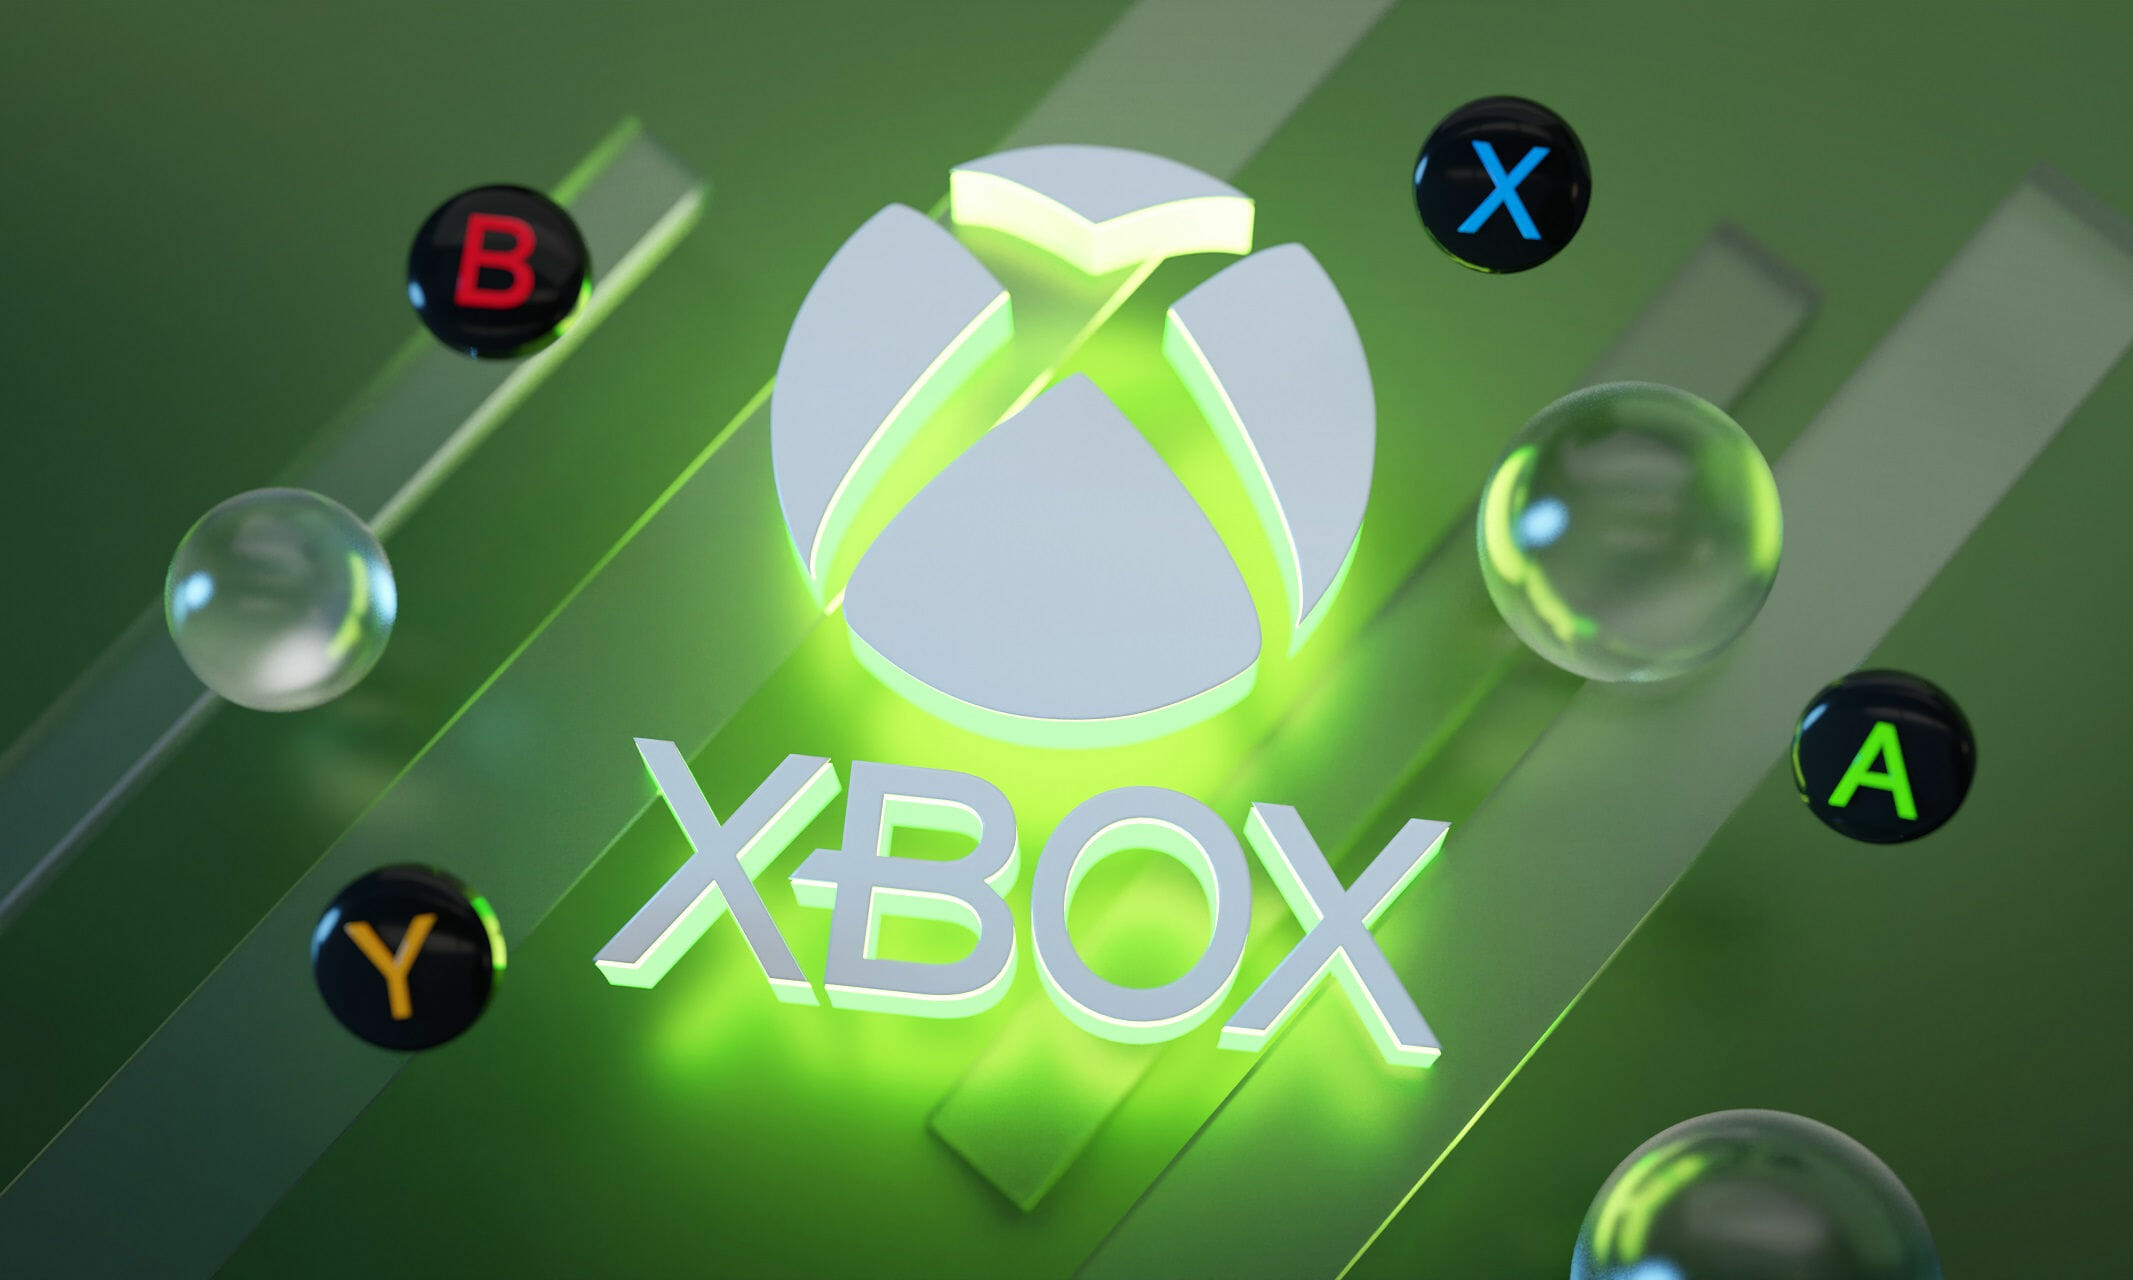 Xbox Academy online training sessions could improve the future of gaming